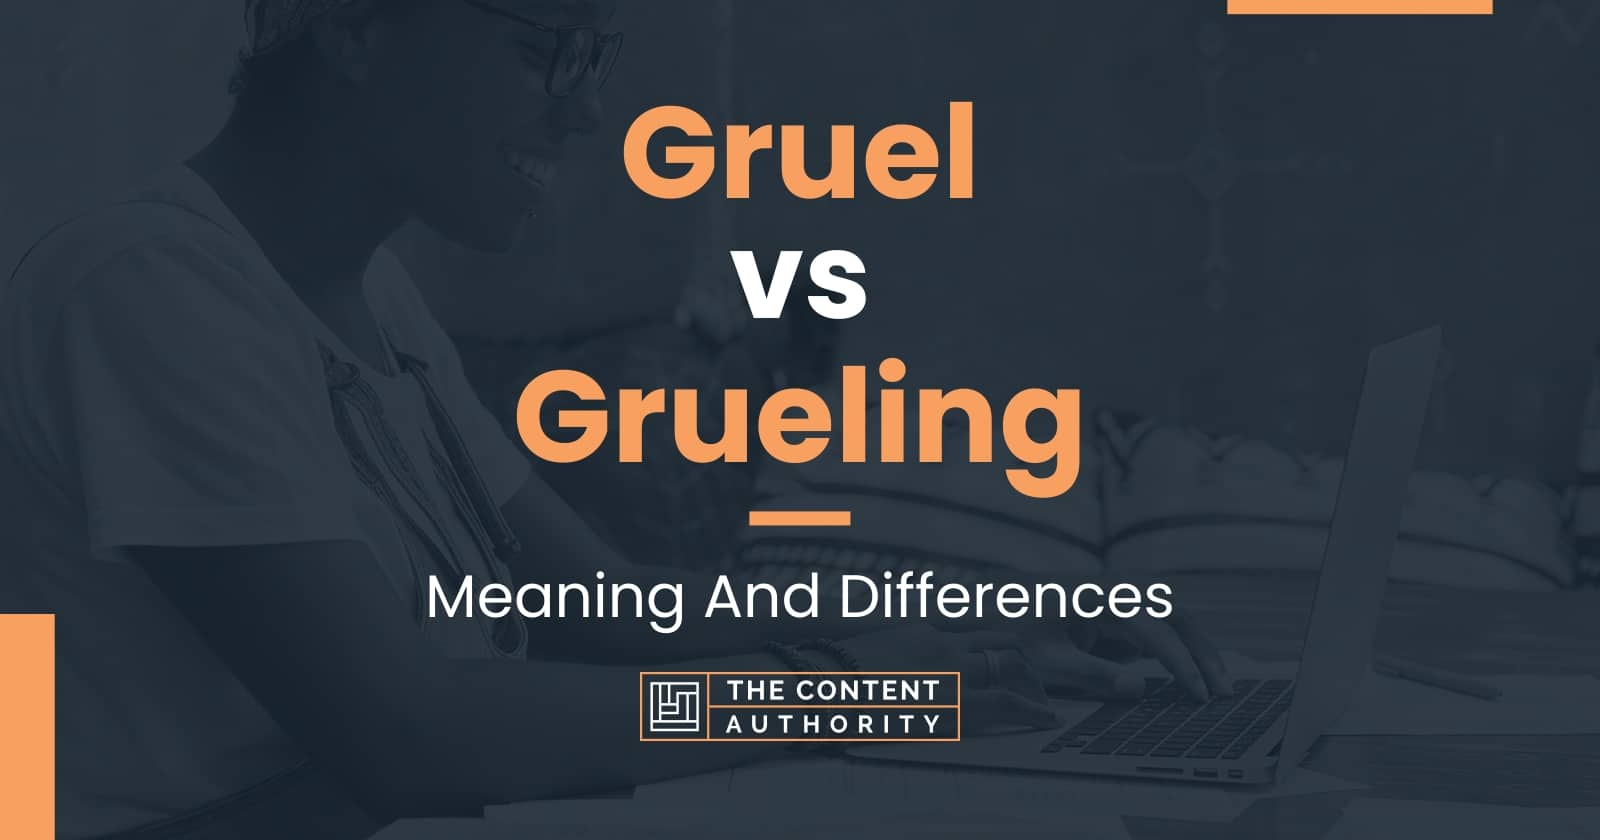 Gruel vs Grueling: Meaning And Differences